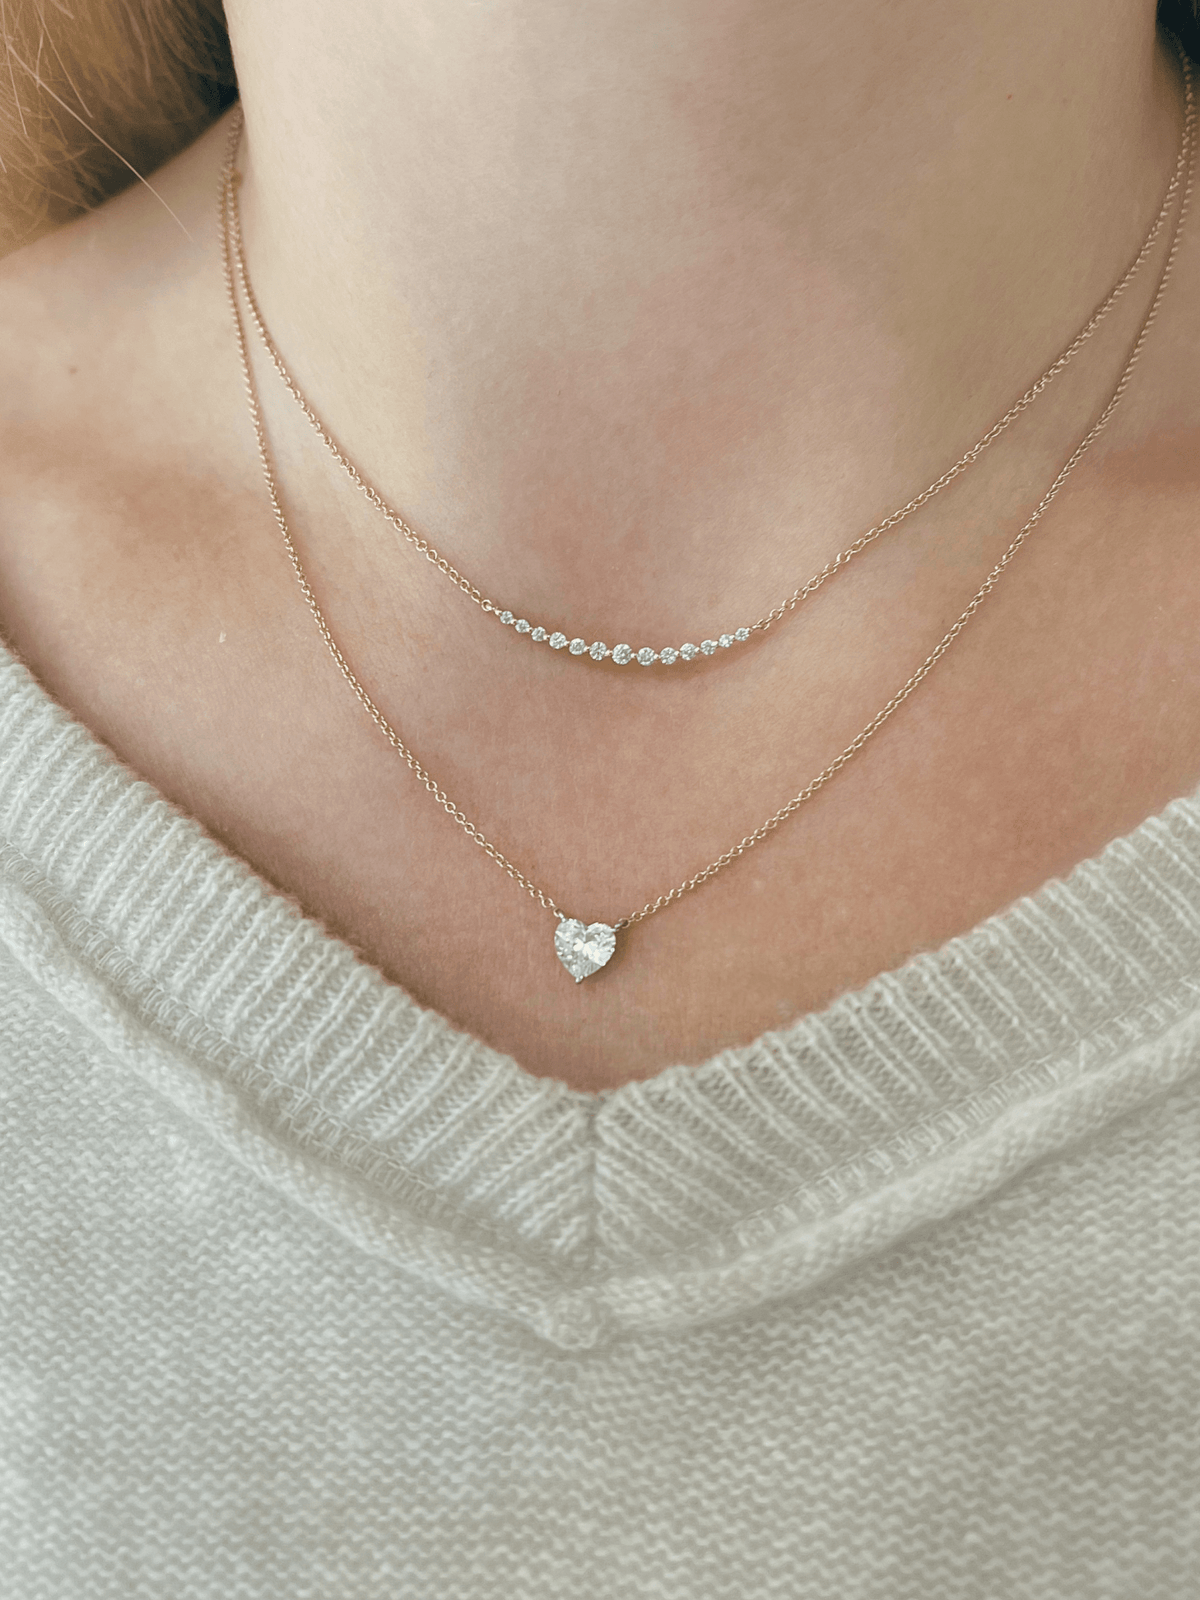 Diamond bar necklace yellow gold layered with single diamond heart necklace